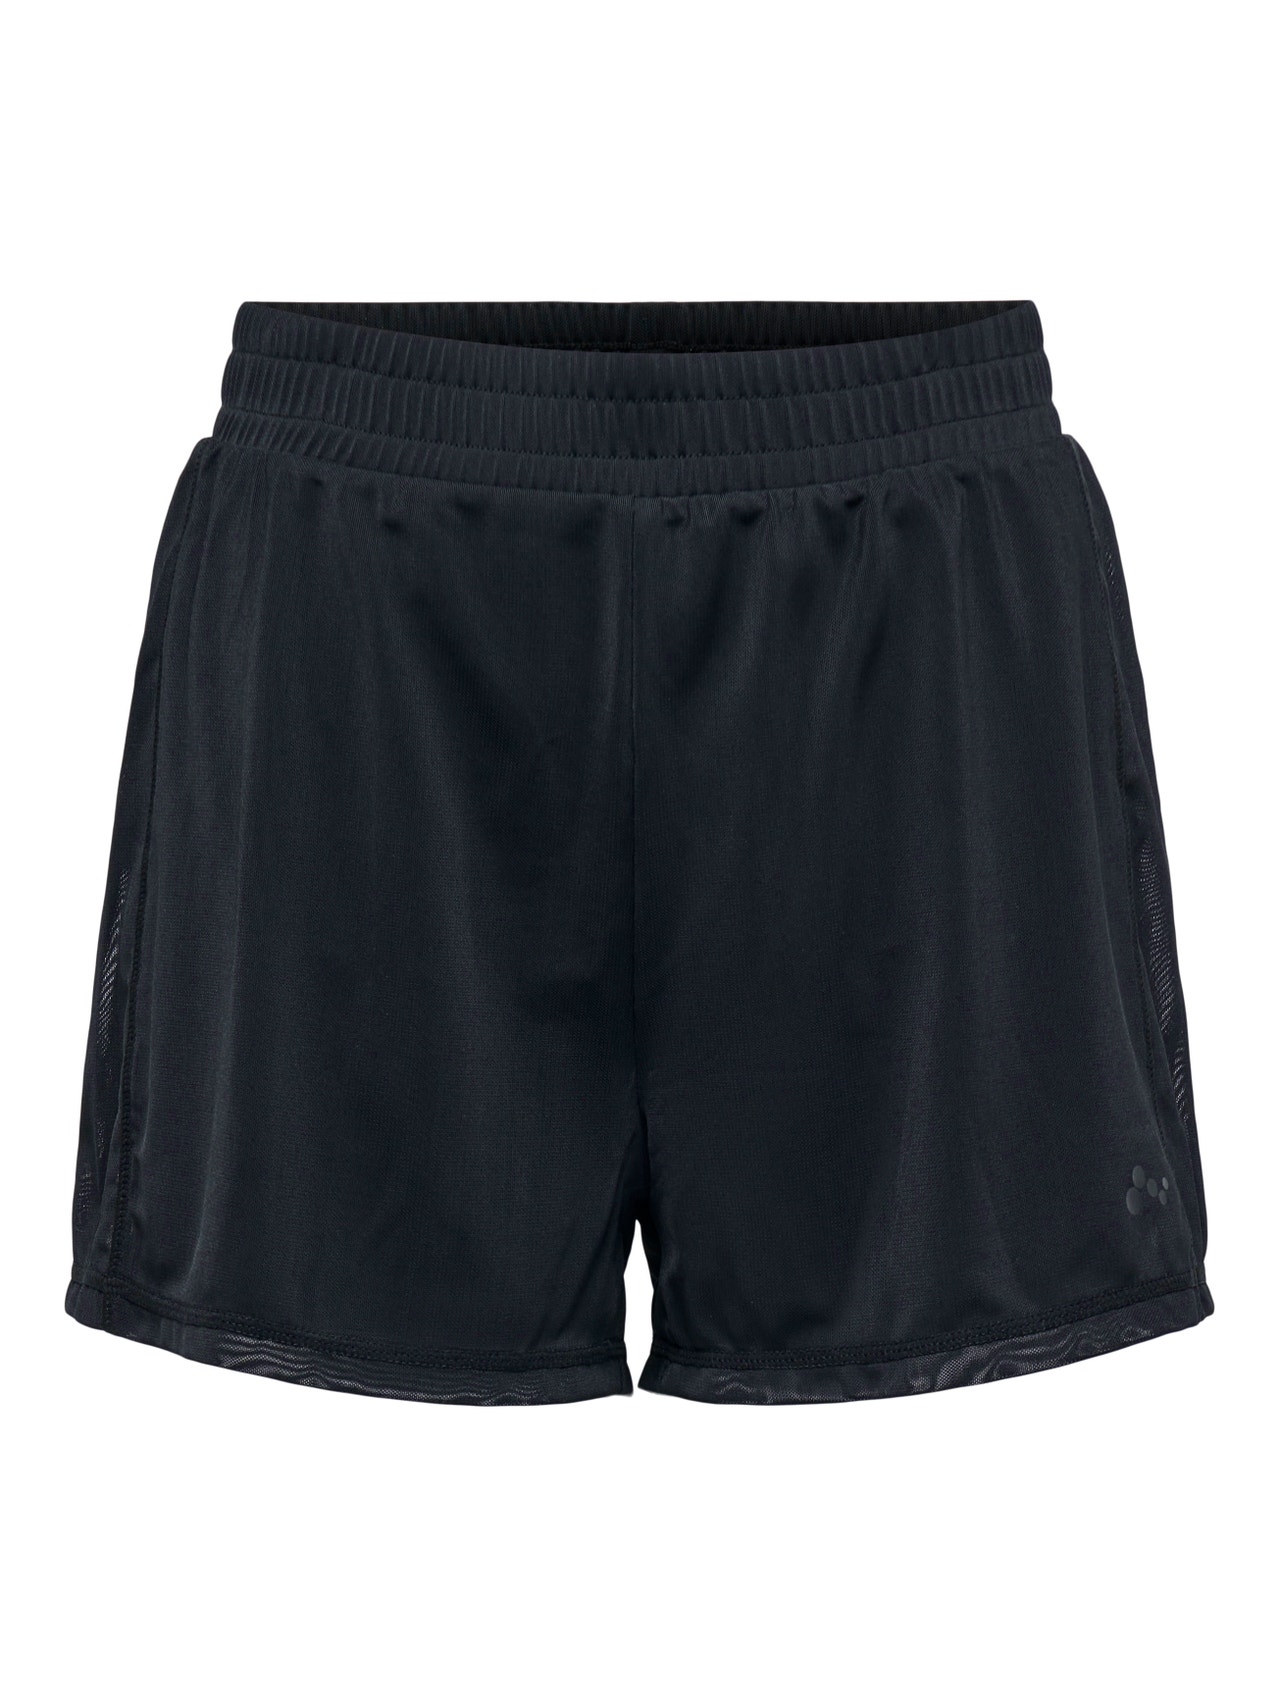 ONLY Loose Fit training Shorts -Black - 15287622